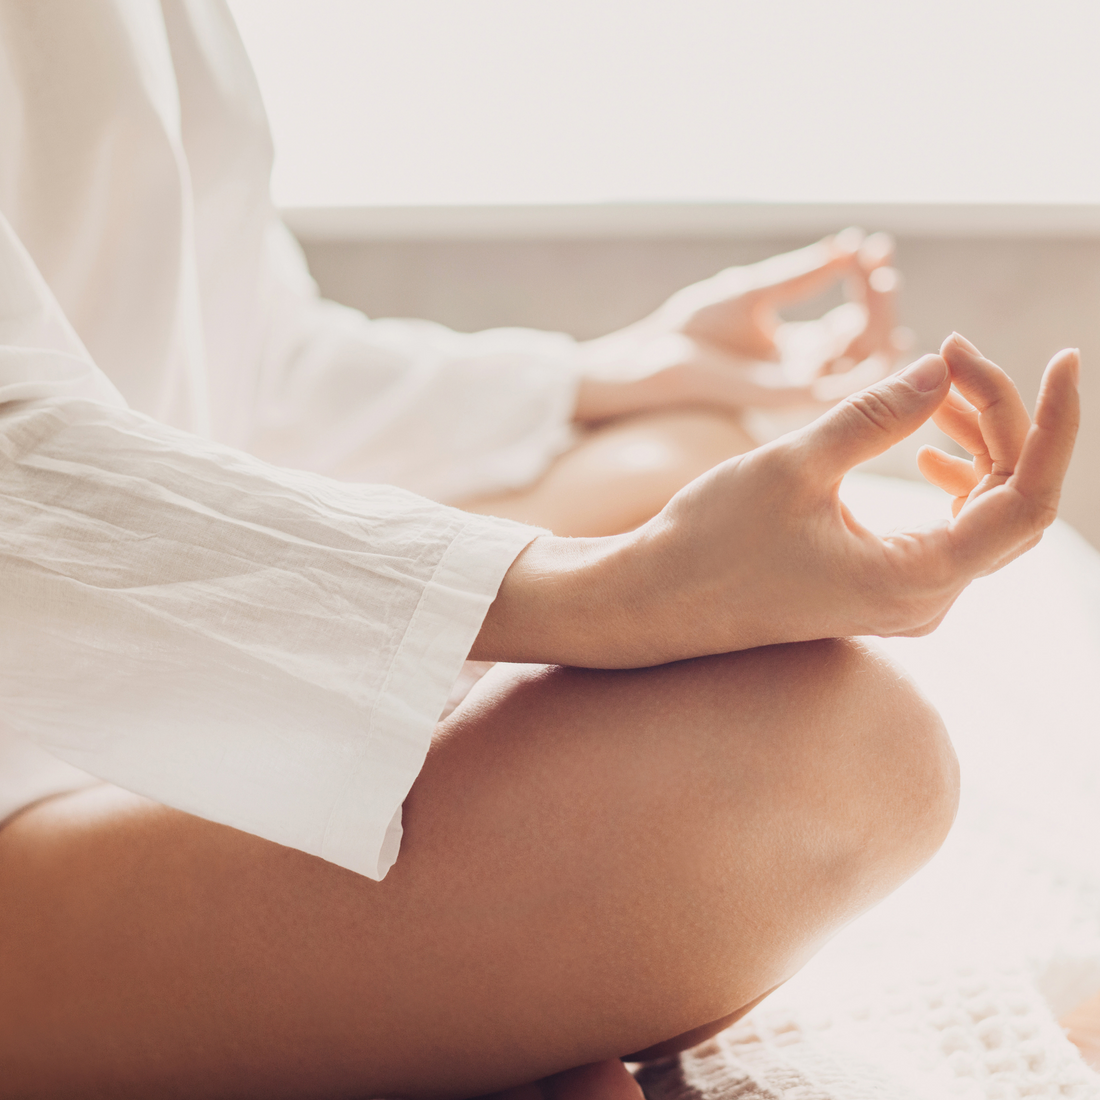 7 guided meditations to help you relax